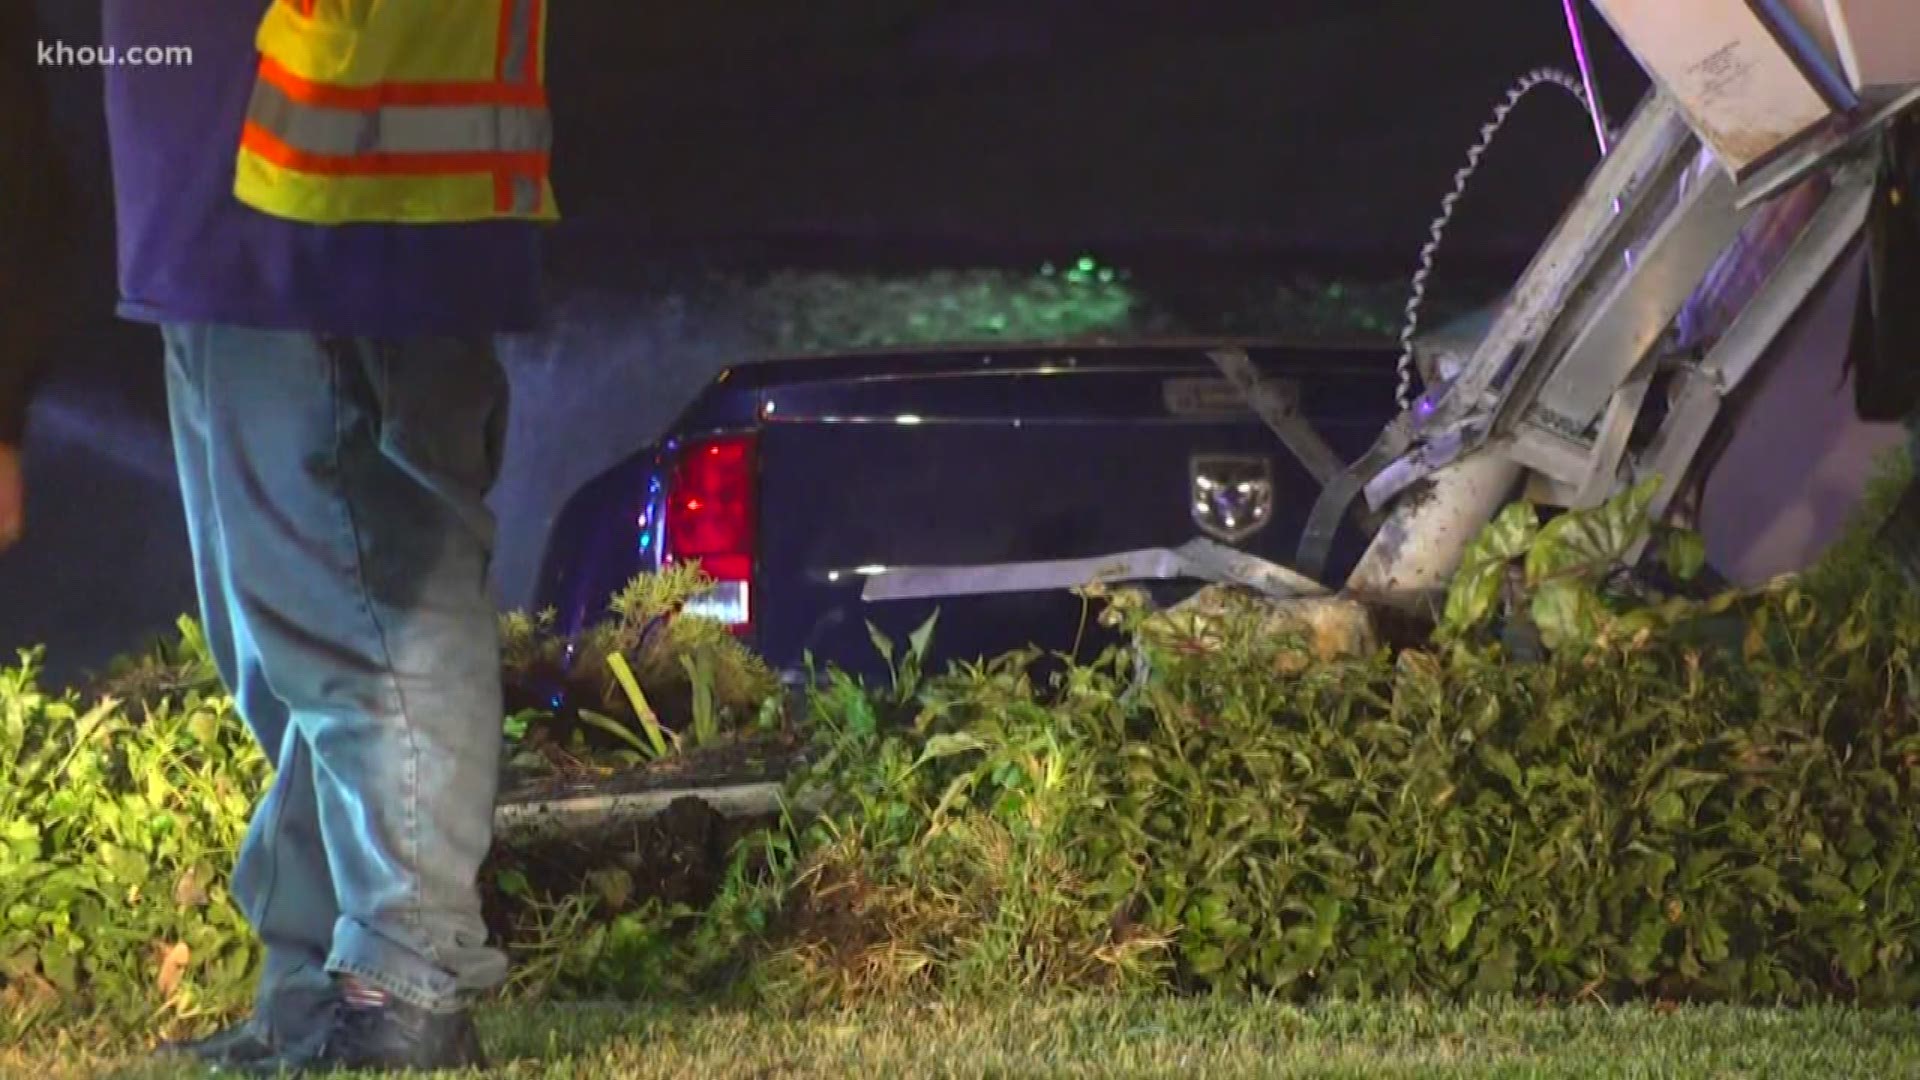 A suspect in a stolen dually pickup eventually crashed it into a retention pond at the end of a high-speed chase, Houston police said Thursday.